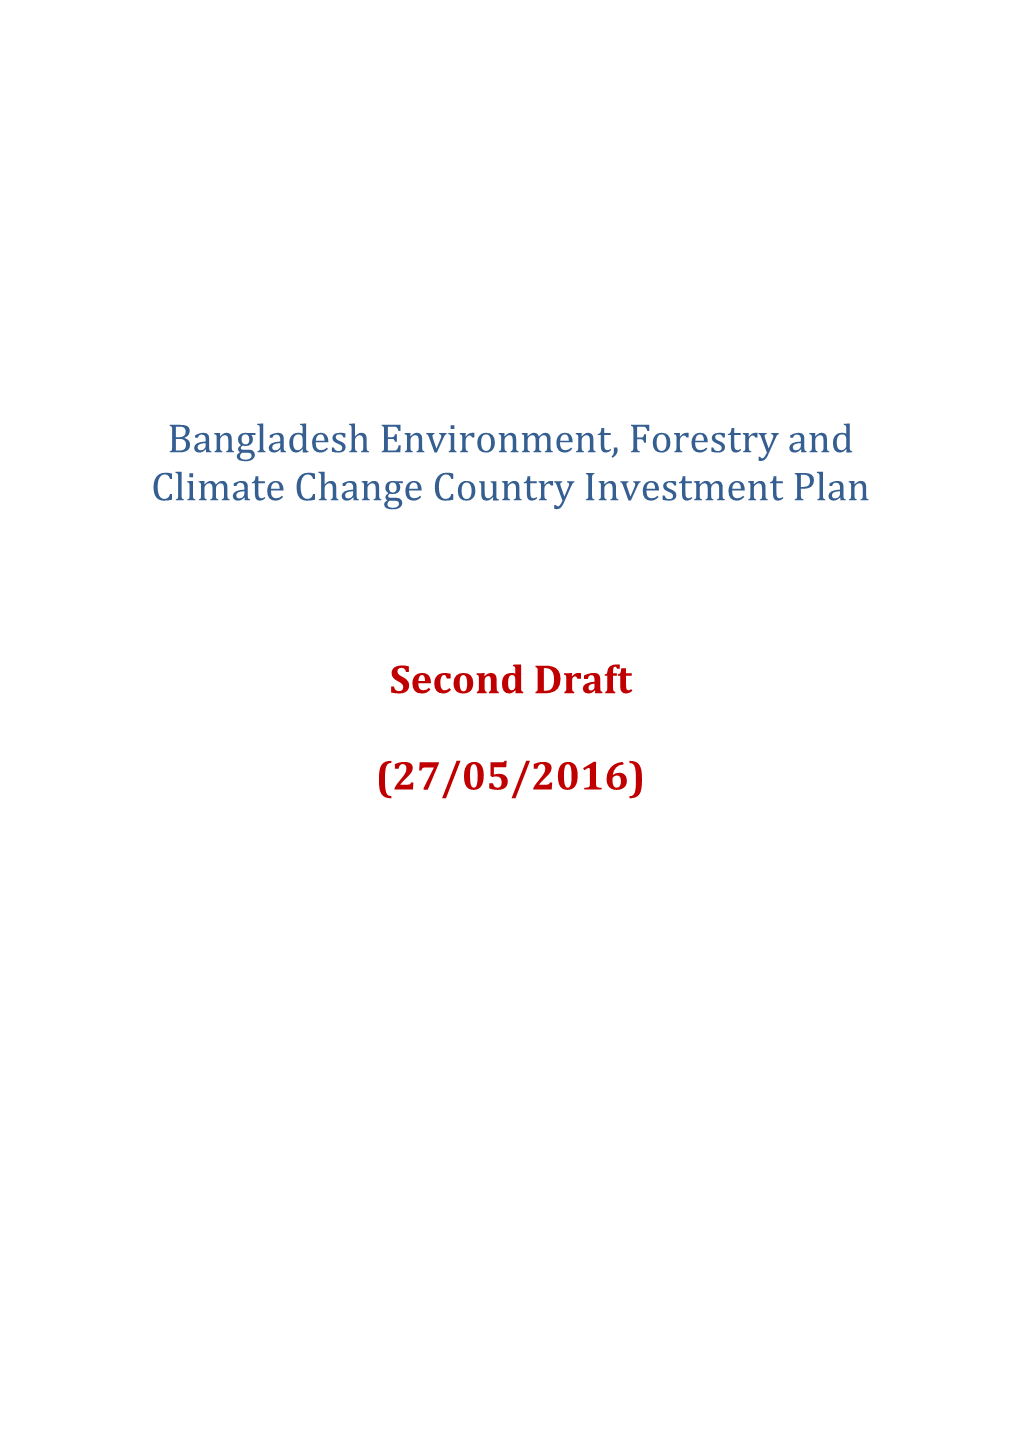 Bangladesh Environment, Forestry and Climate Change Country Investment Plan